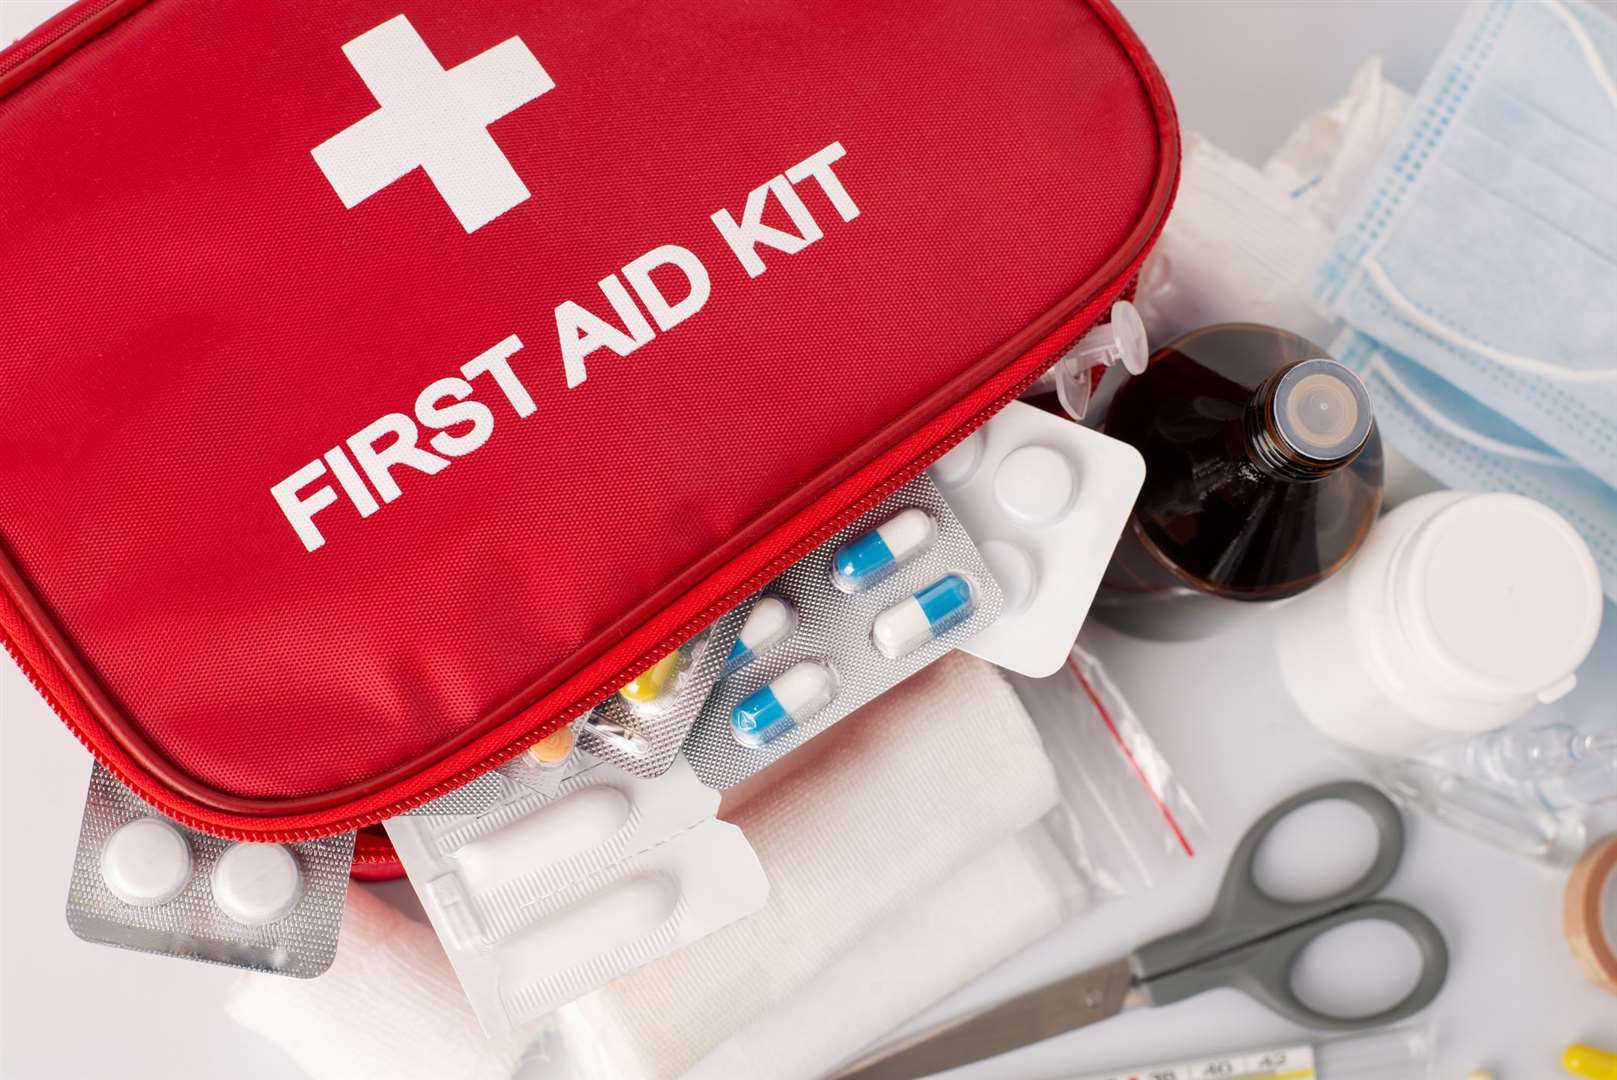 The first aid courses are available for representatives of firms based in Tunbridge Wells town centre